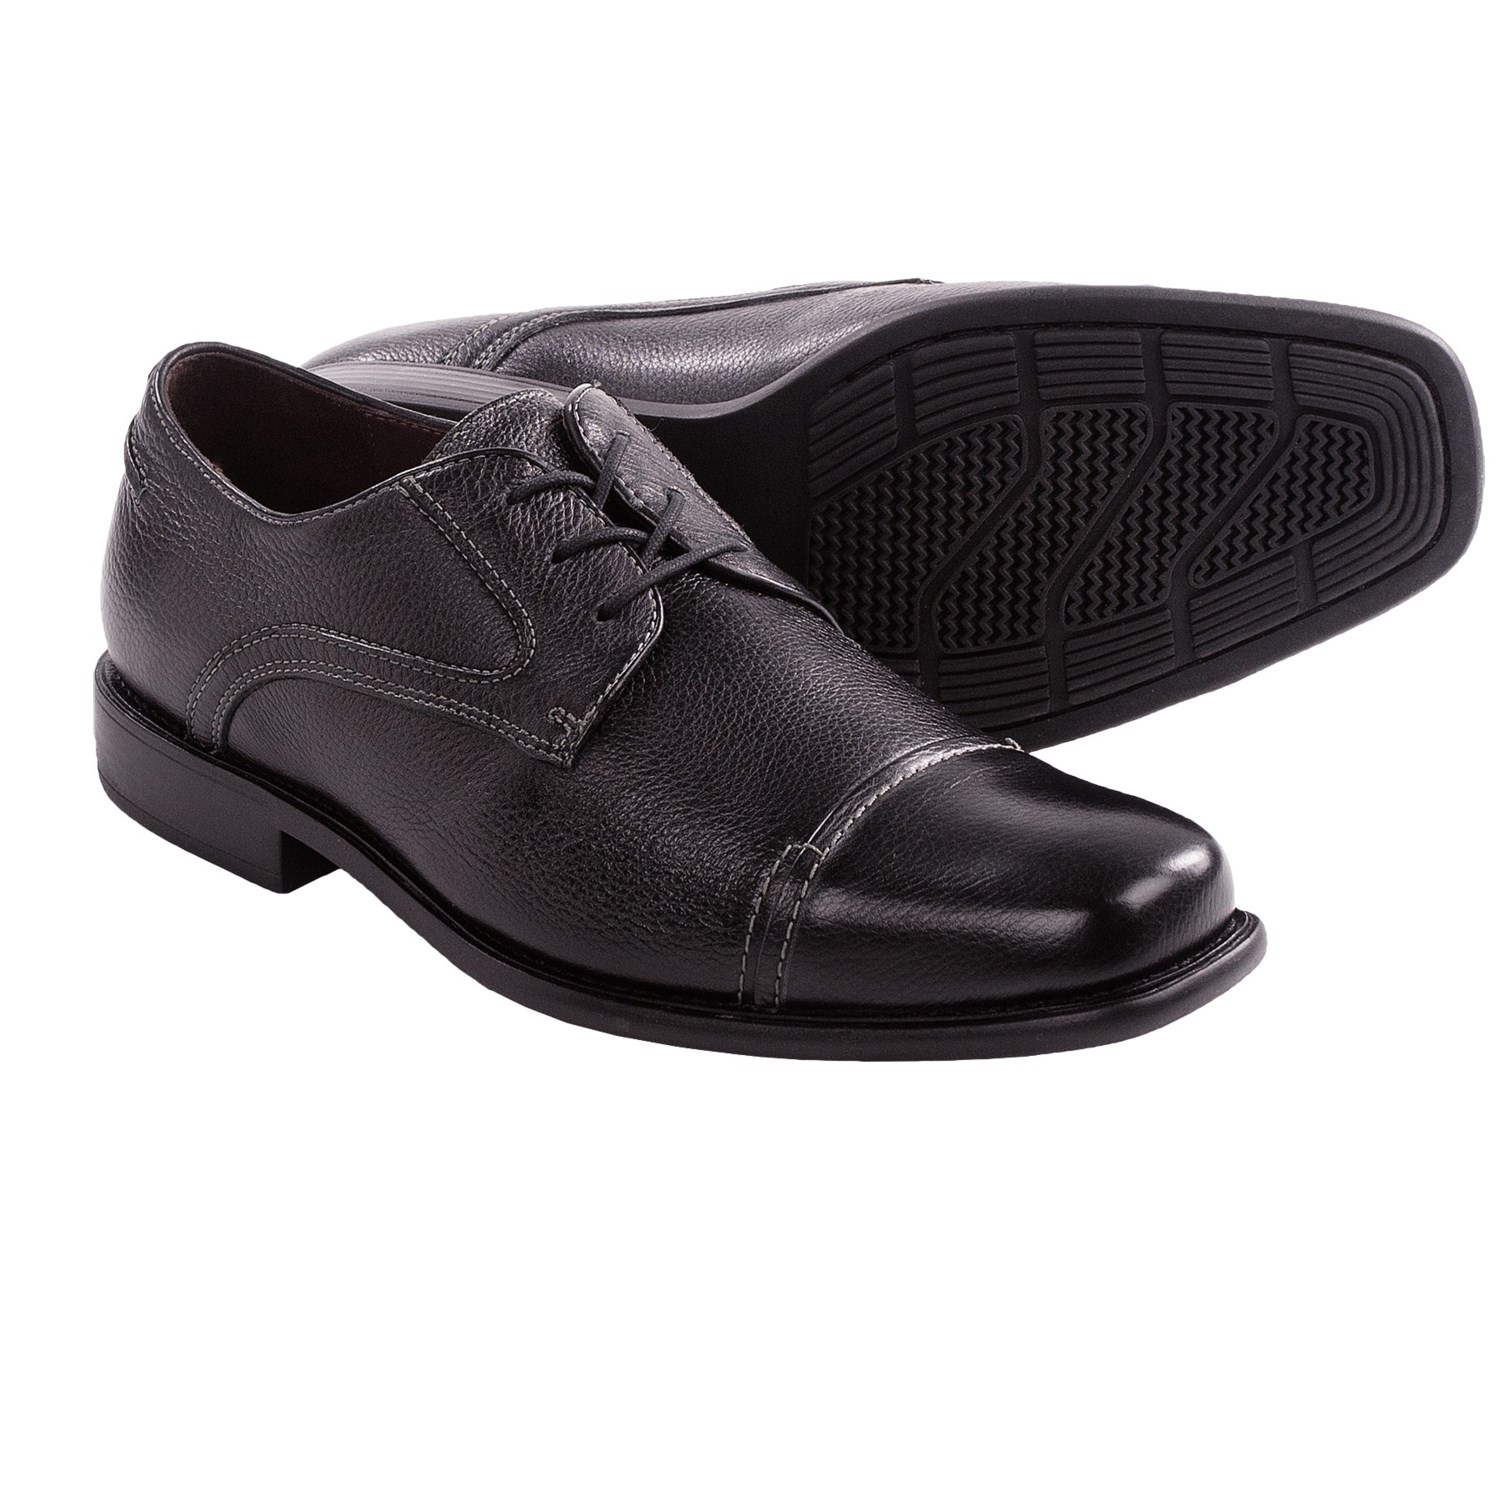 johnston-and-murphy-macomb-calfskin-shoes-cap-toe-lace-ups-for-men-in ...